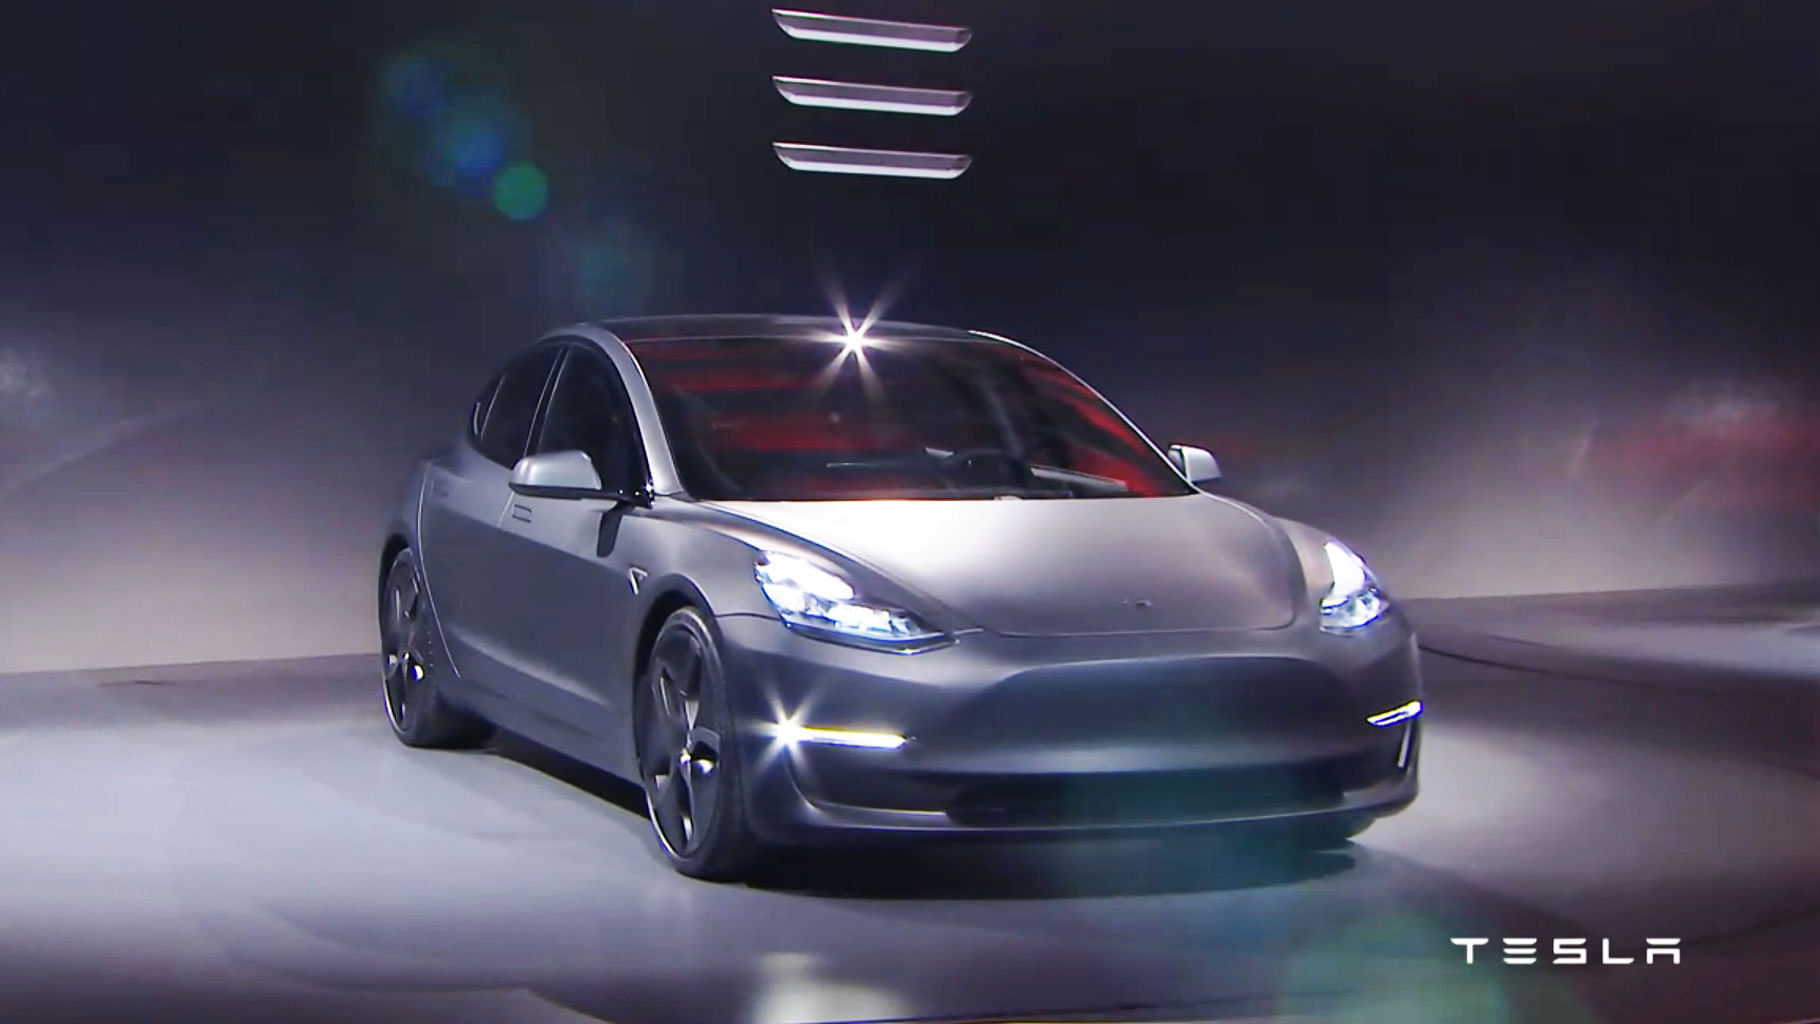 Tesla has launched a slew of cars around the world, but India is yet to get them officially.